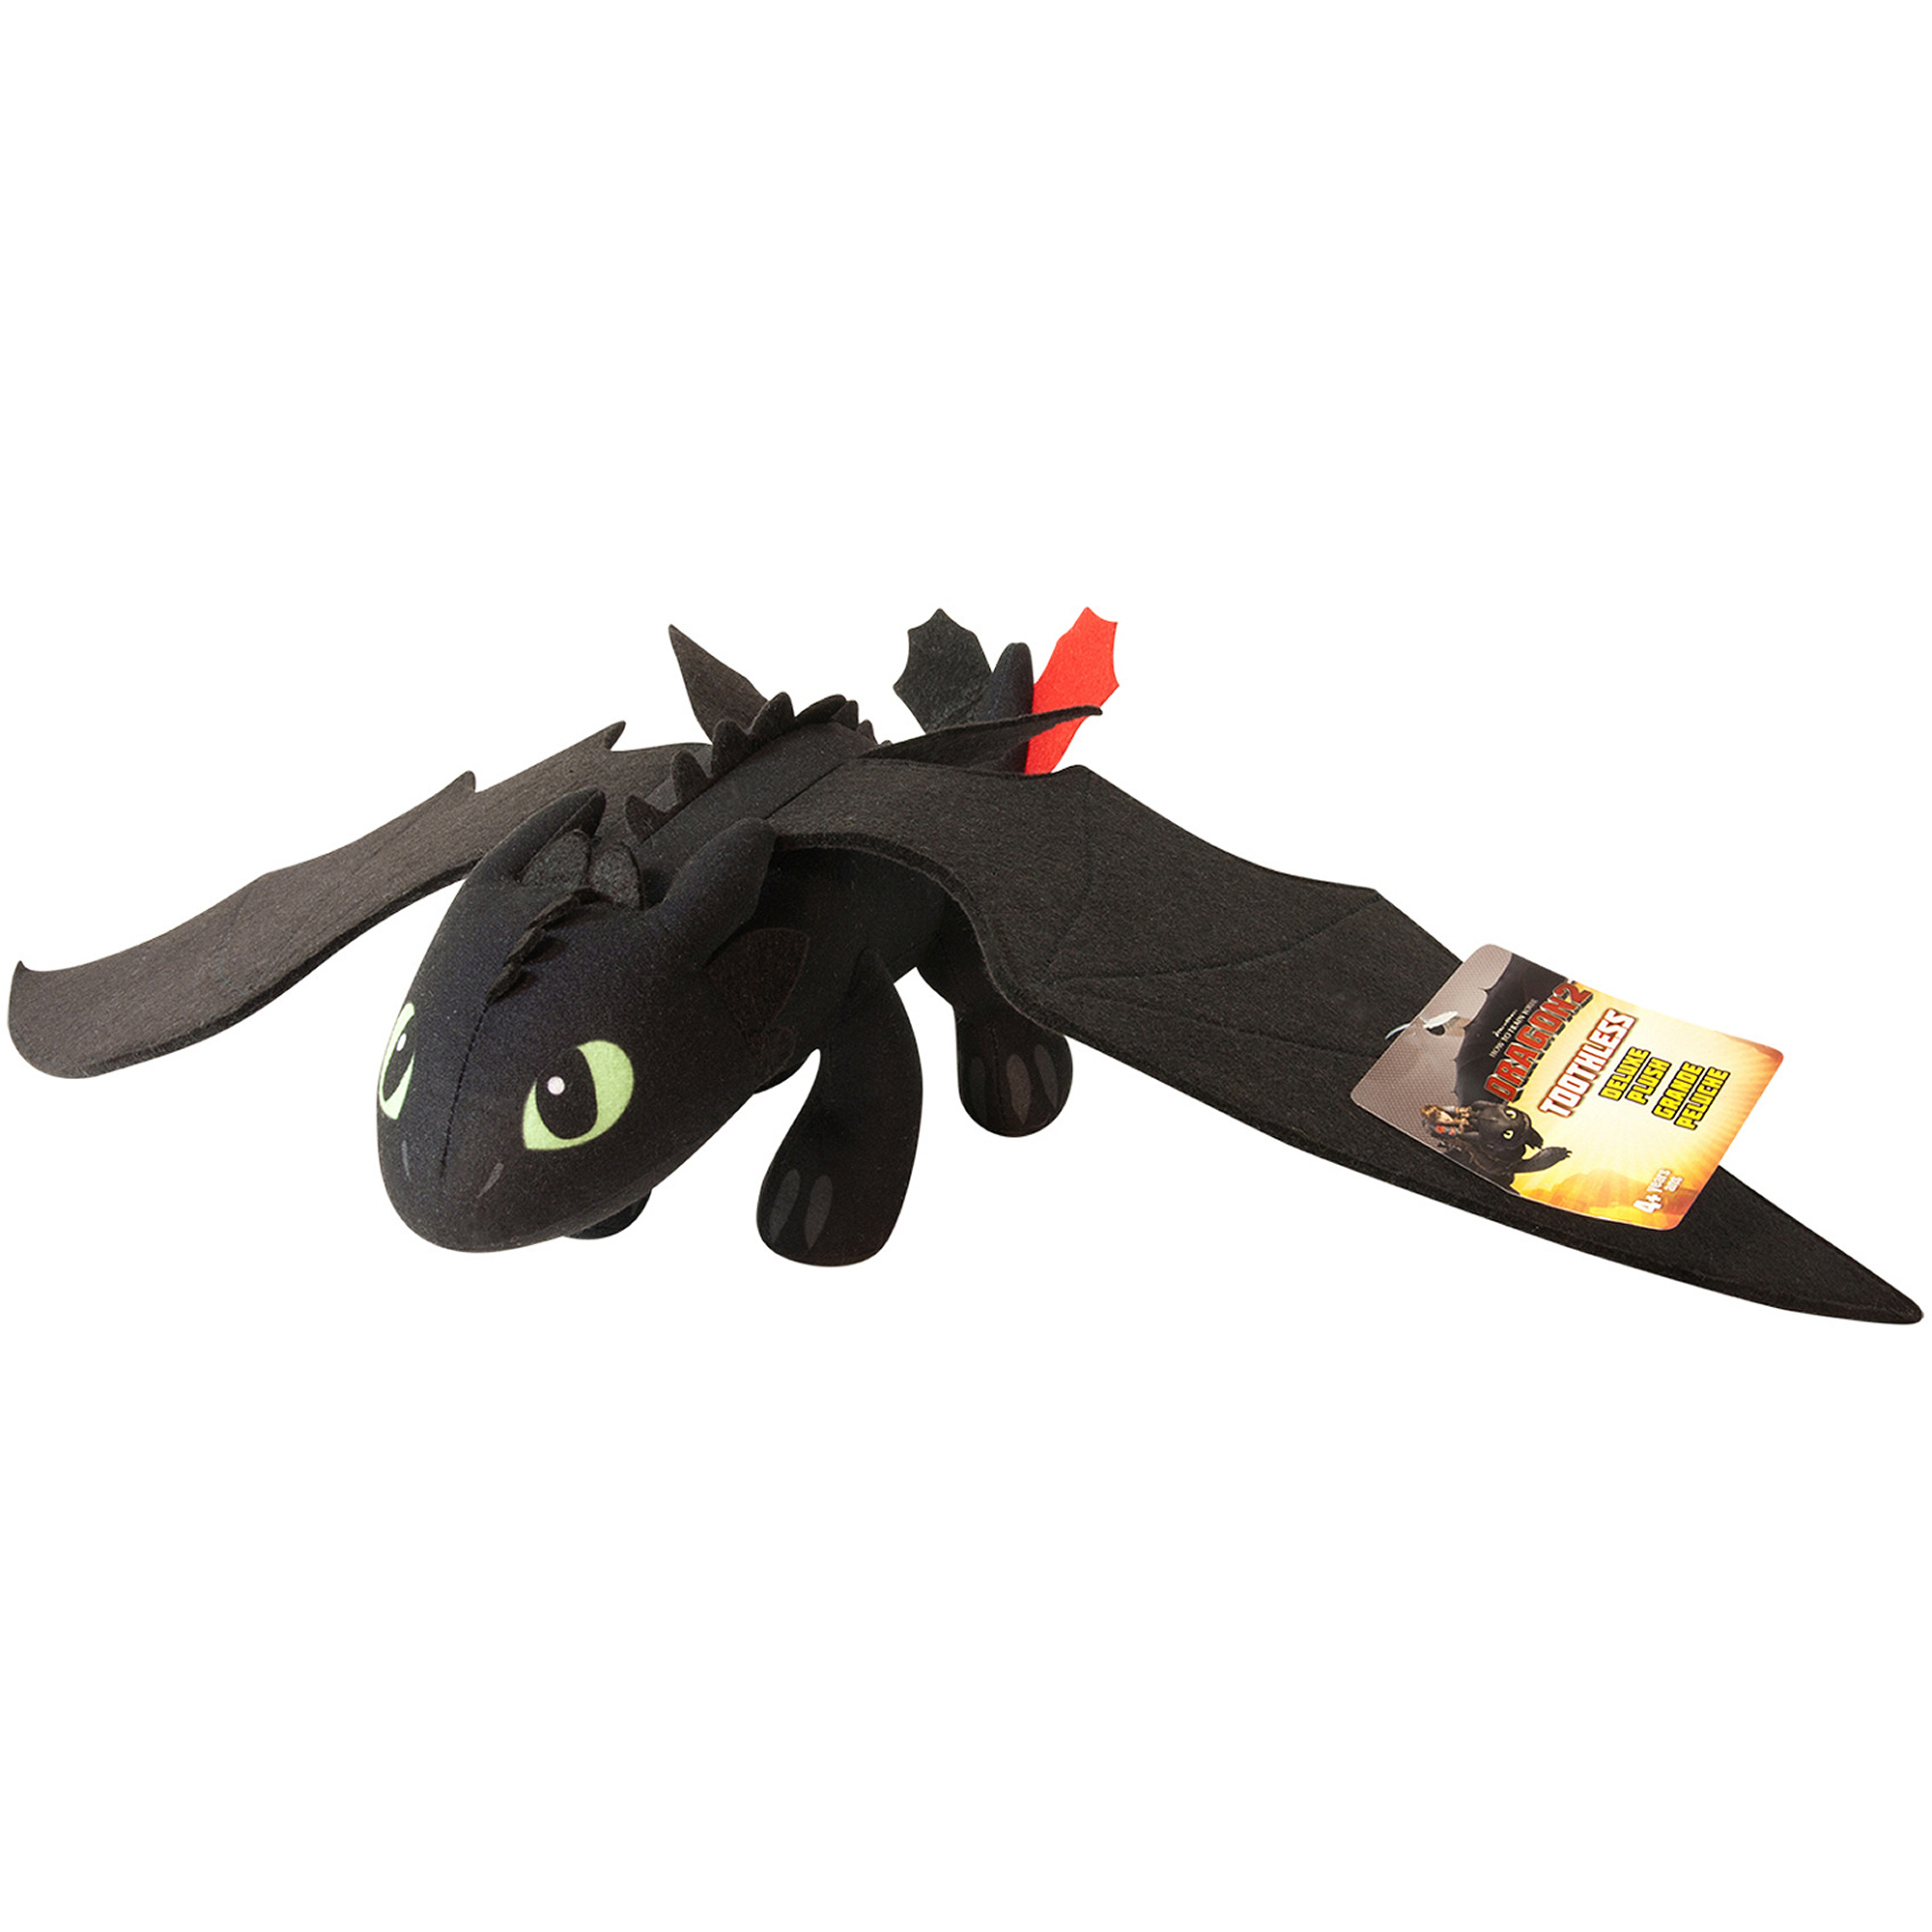 DreamWorks Dragons: How To Train Your Dragon 2 Toothless 14" Plush - image 1 of 2